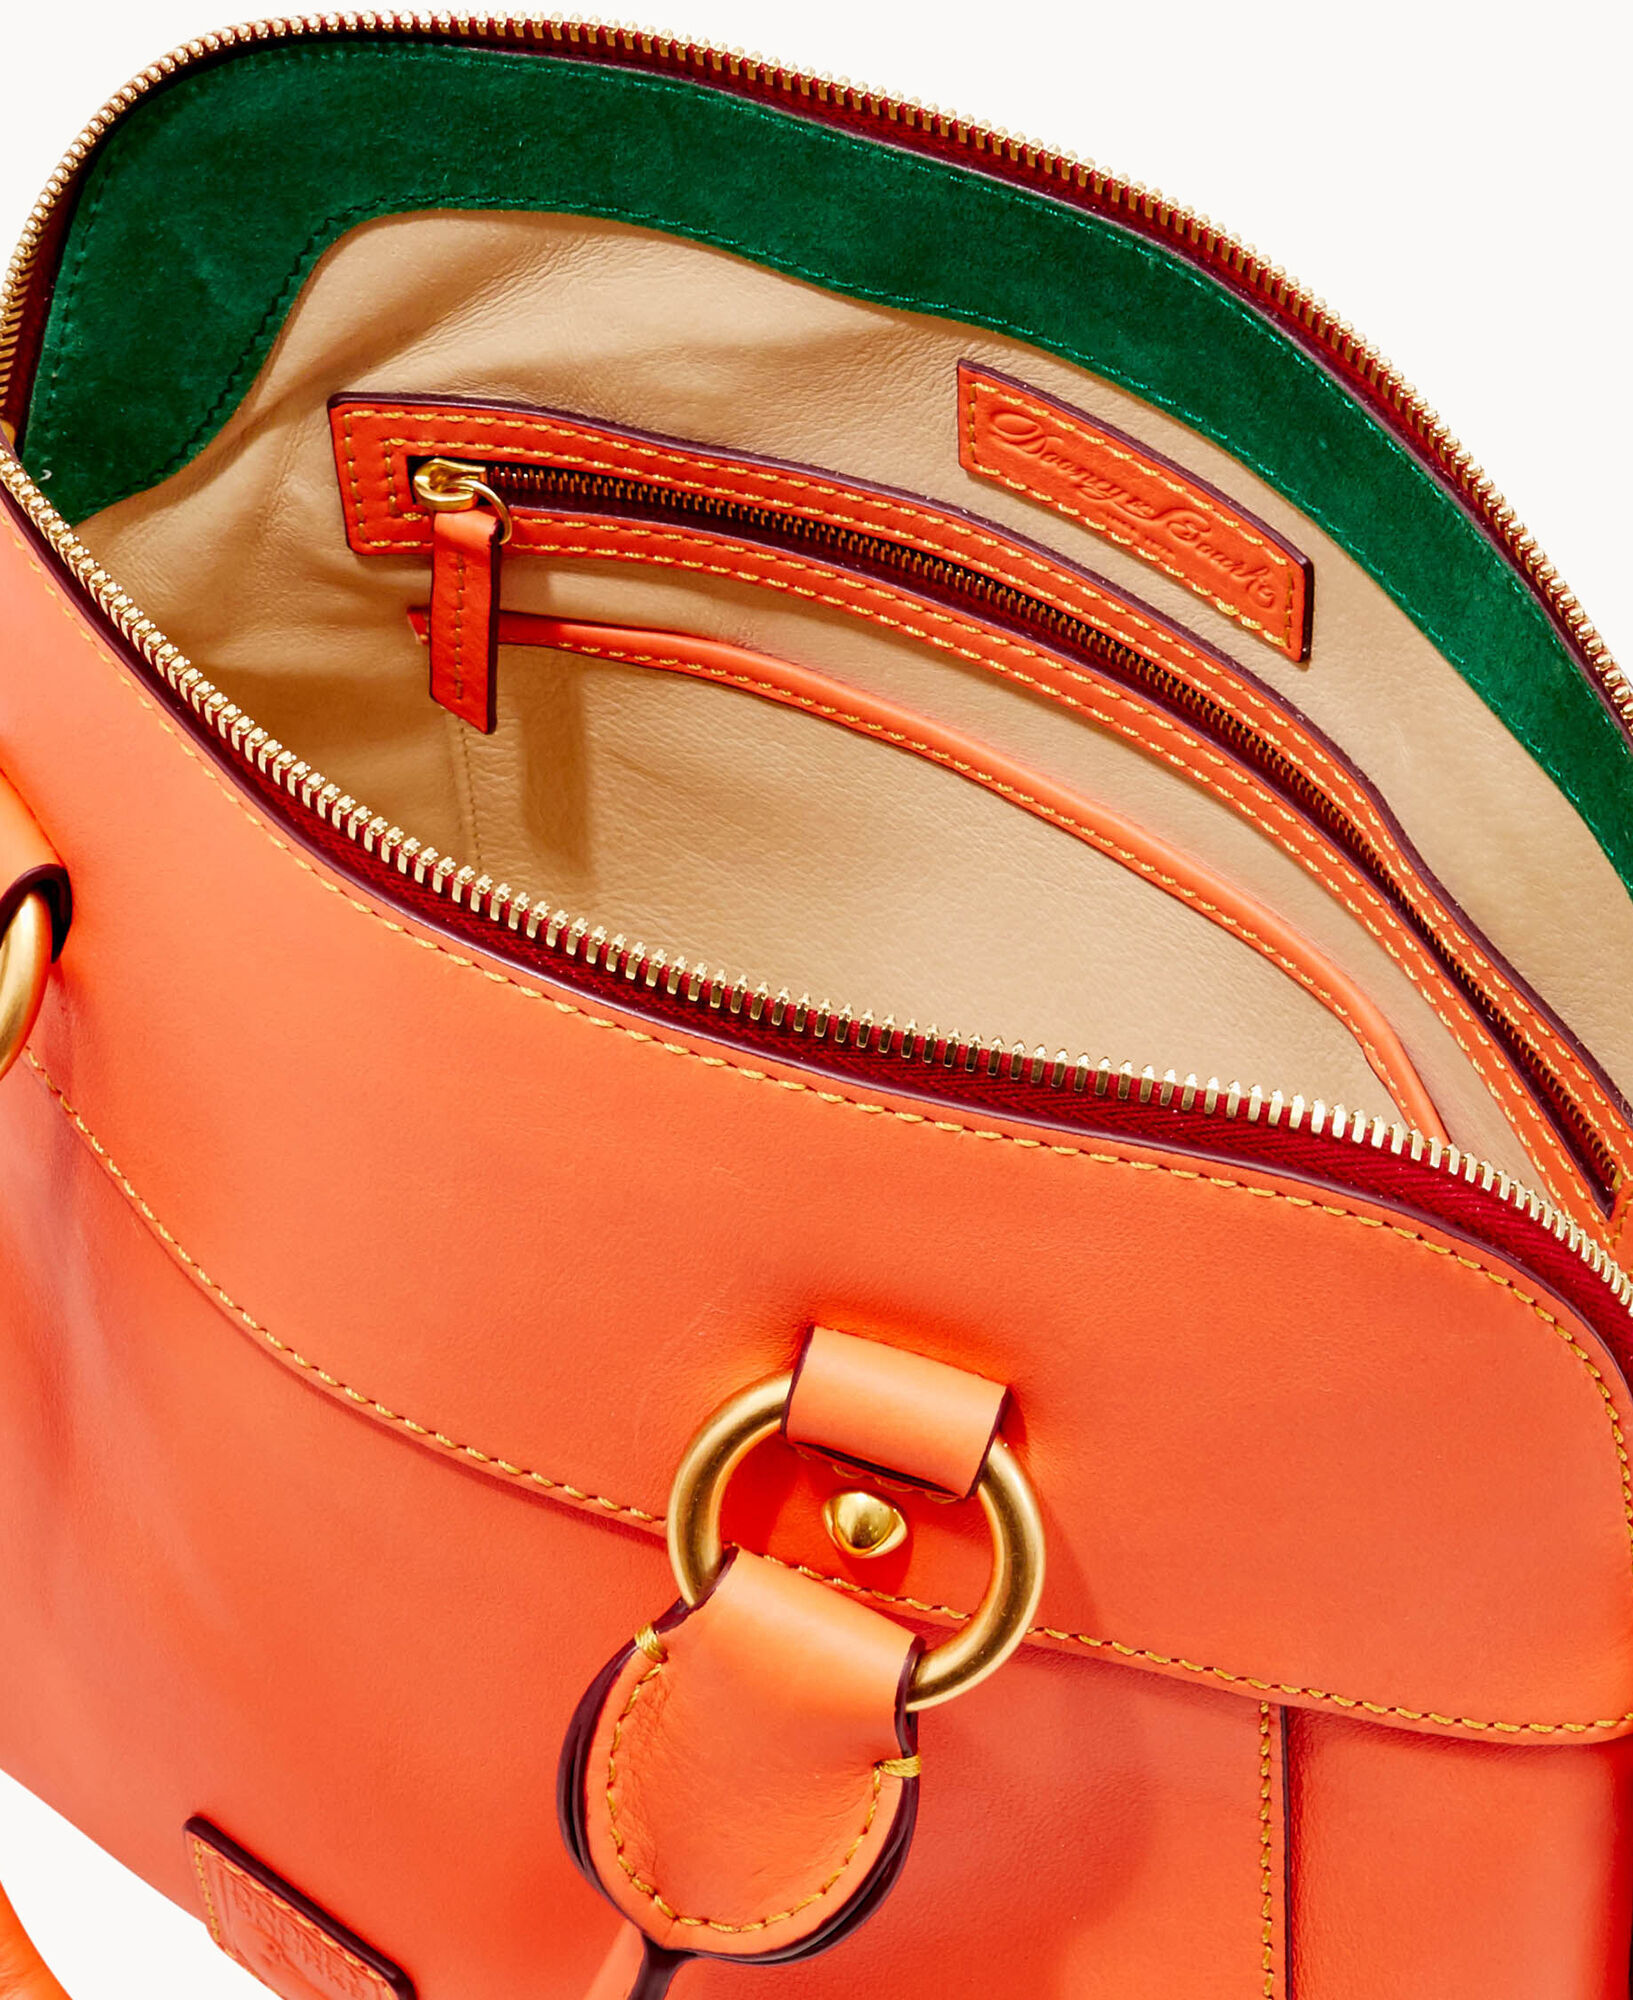 DOONEY AND BOURKE— FLORENTINE CAMERON in the color Salmon- REVIEW